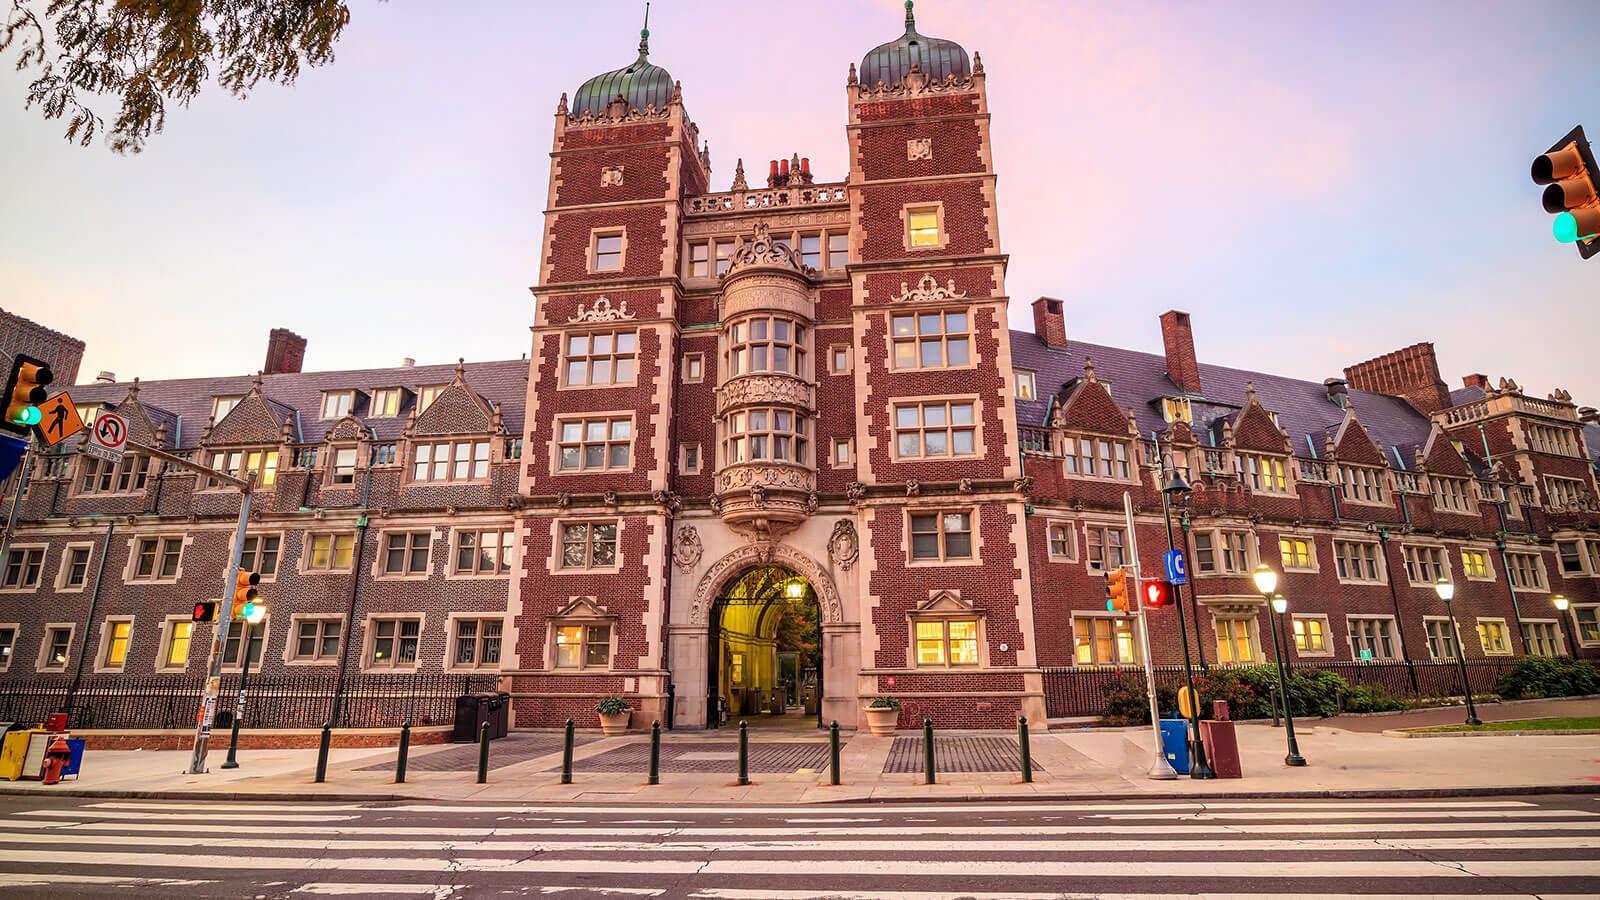 Download Upenn Wallpaper, HD Background Download